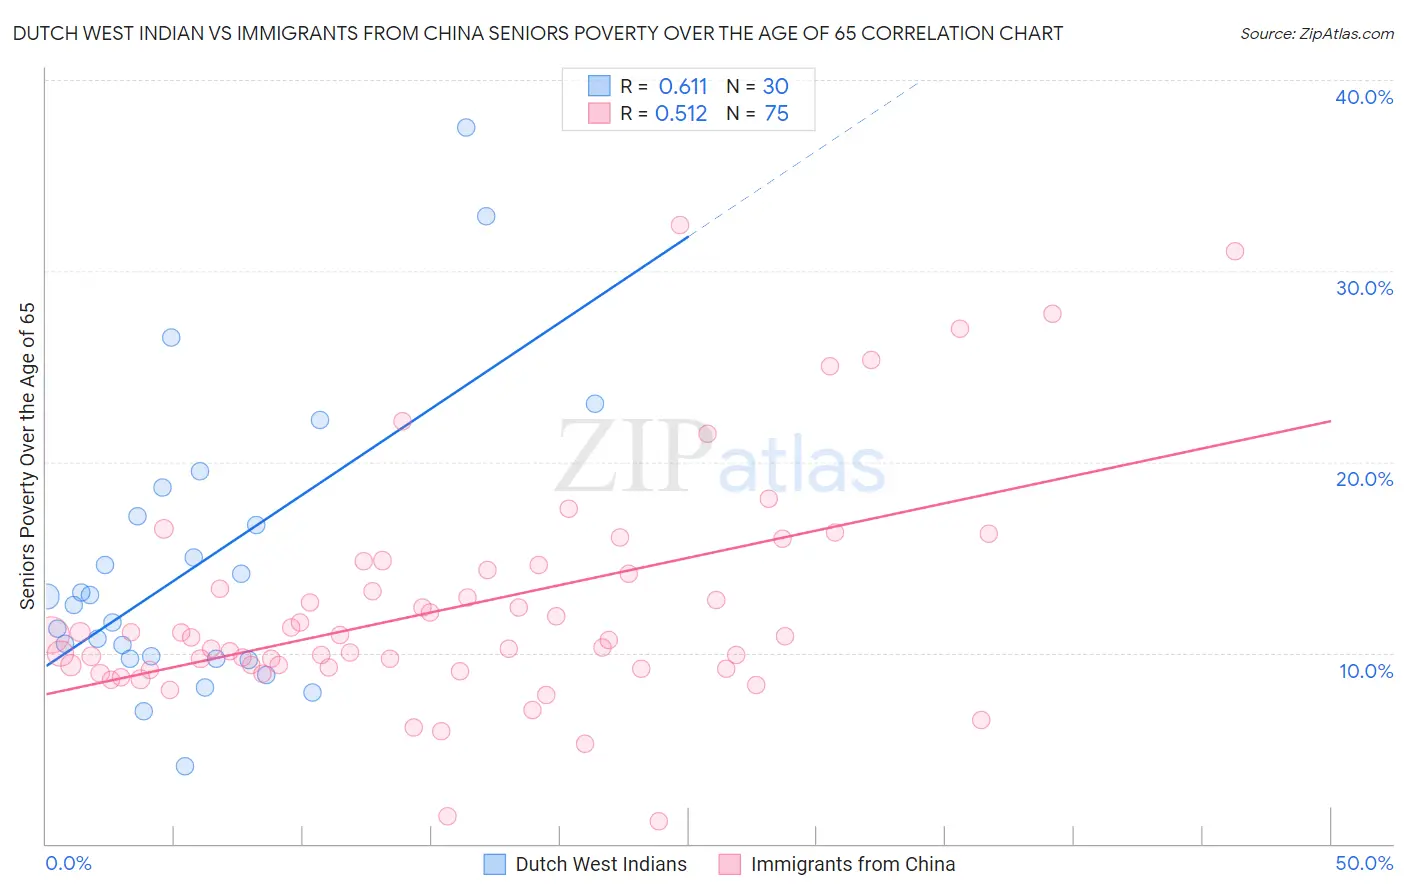 Dutch West Indian vs Immigrants from China Seniors Poverty Over the Age of 65